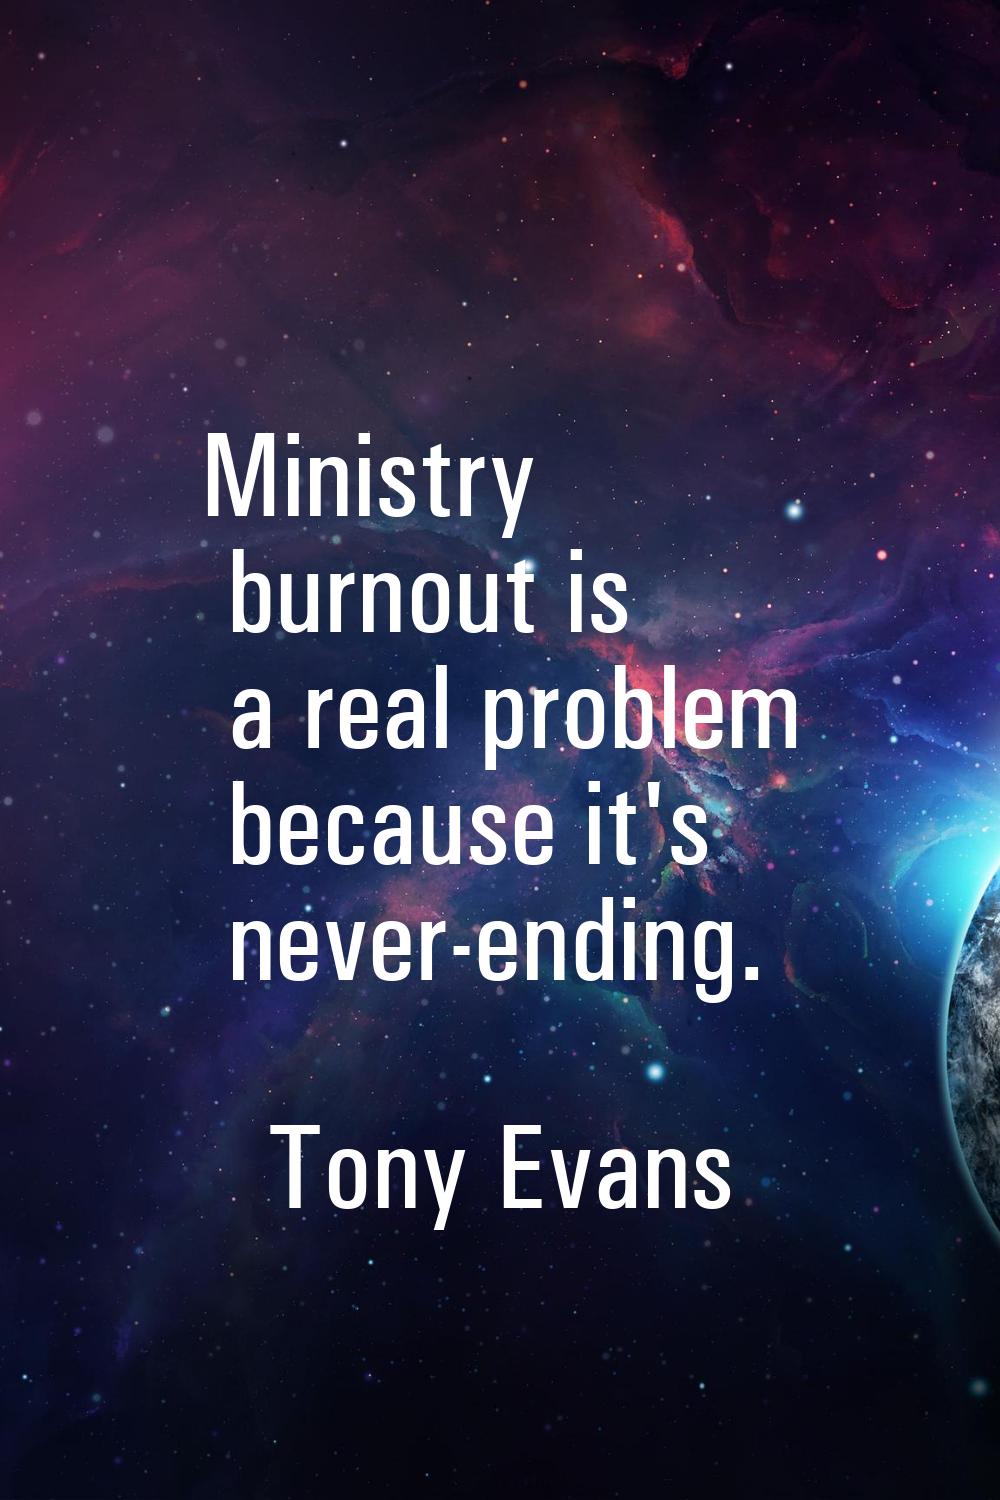 Ministry burnout is a real problem because it's never-ending.